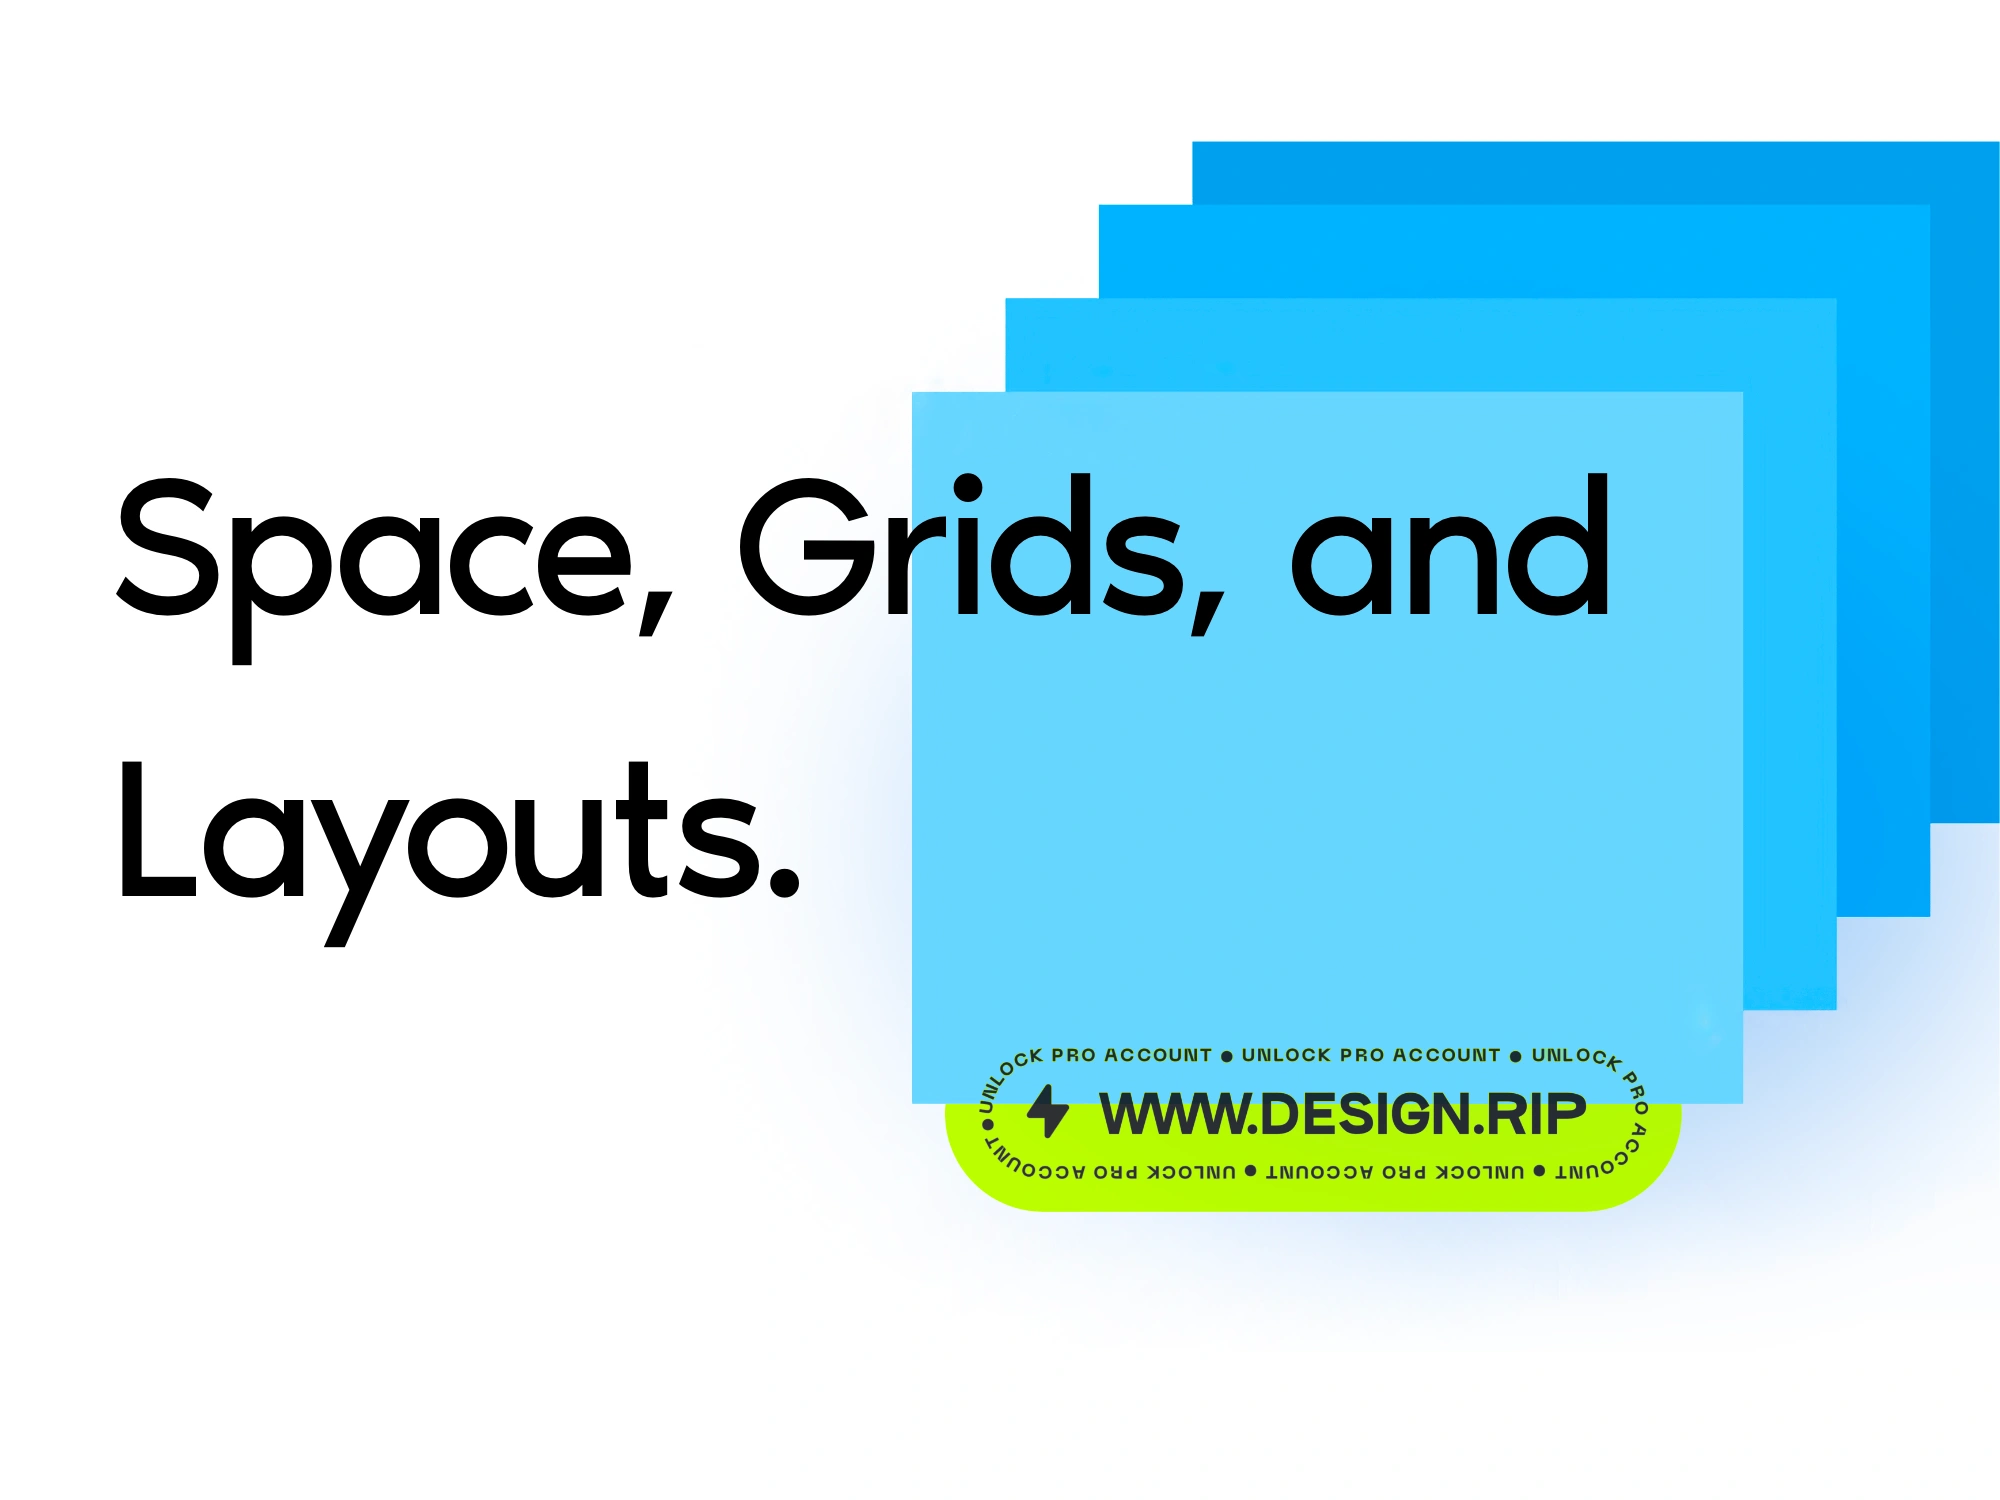 Space, grids, and layouts